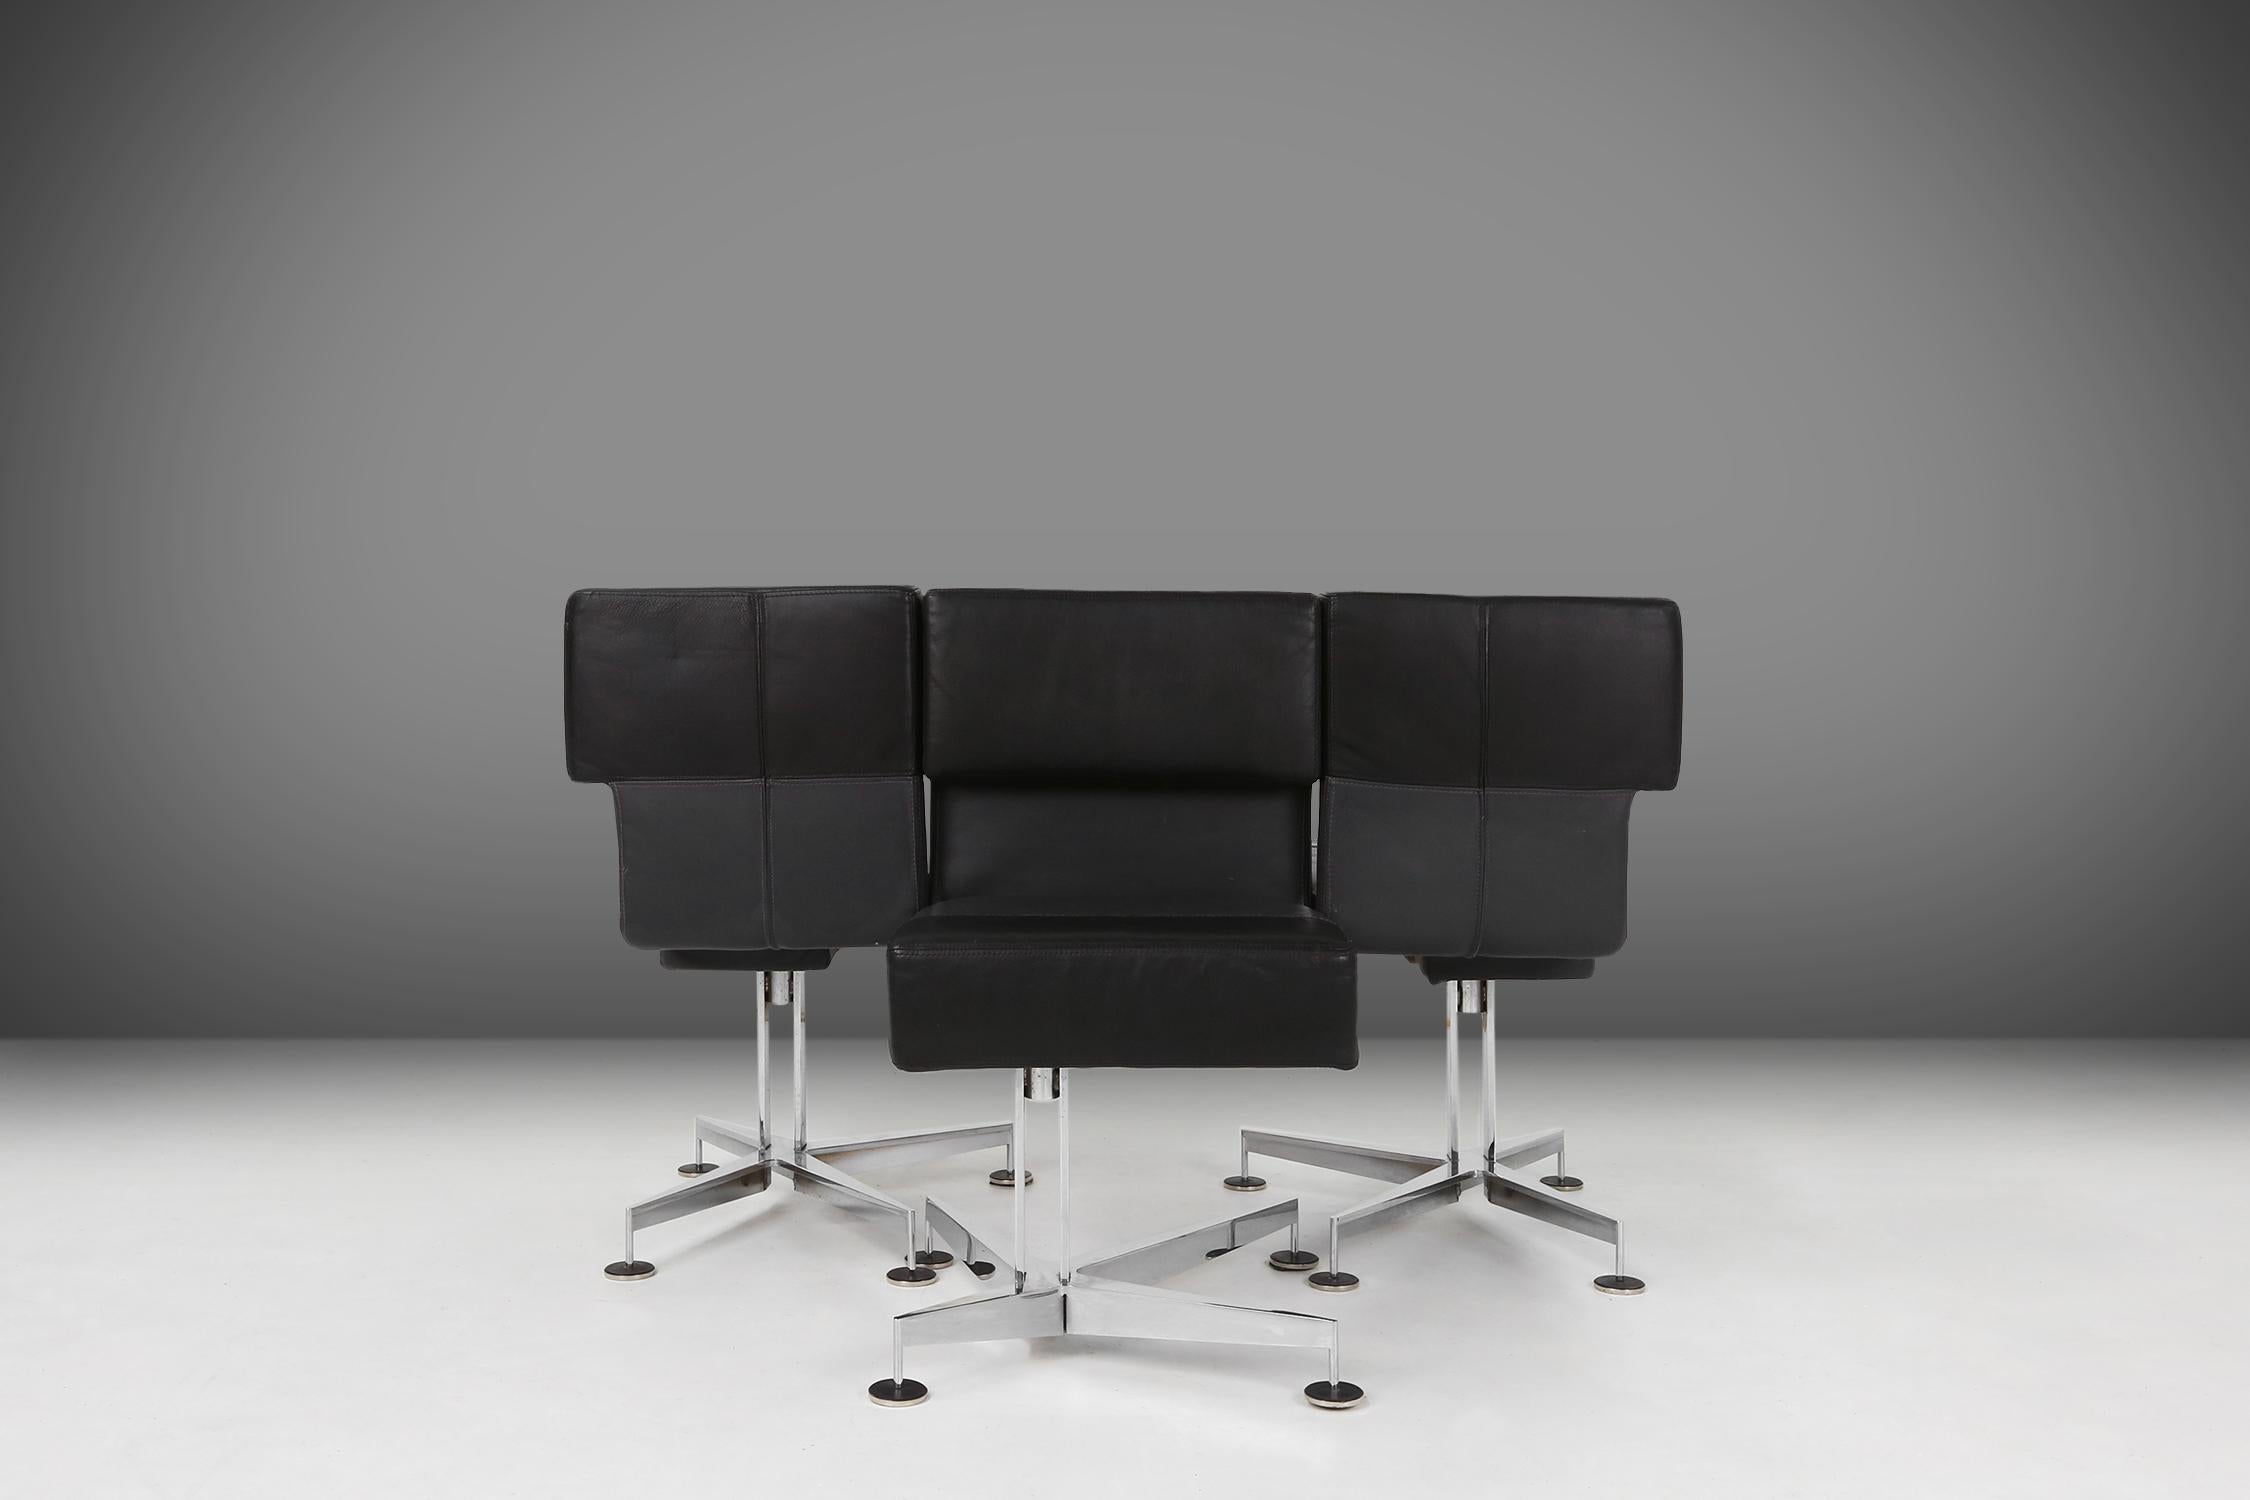 Made in 1980 by Sedus, these chairs are a model of quality and design. They are made of black and grey leather, which gives a luxurious and comfortable look. The heavy metal base, which is chromed, ensures stability and durability.

The special